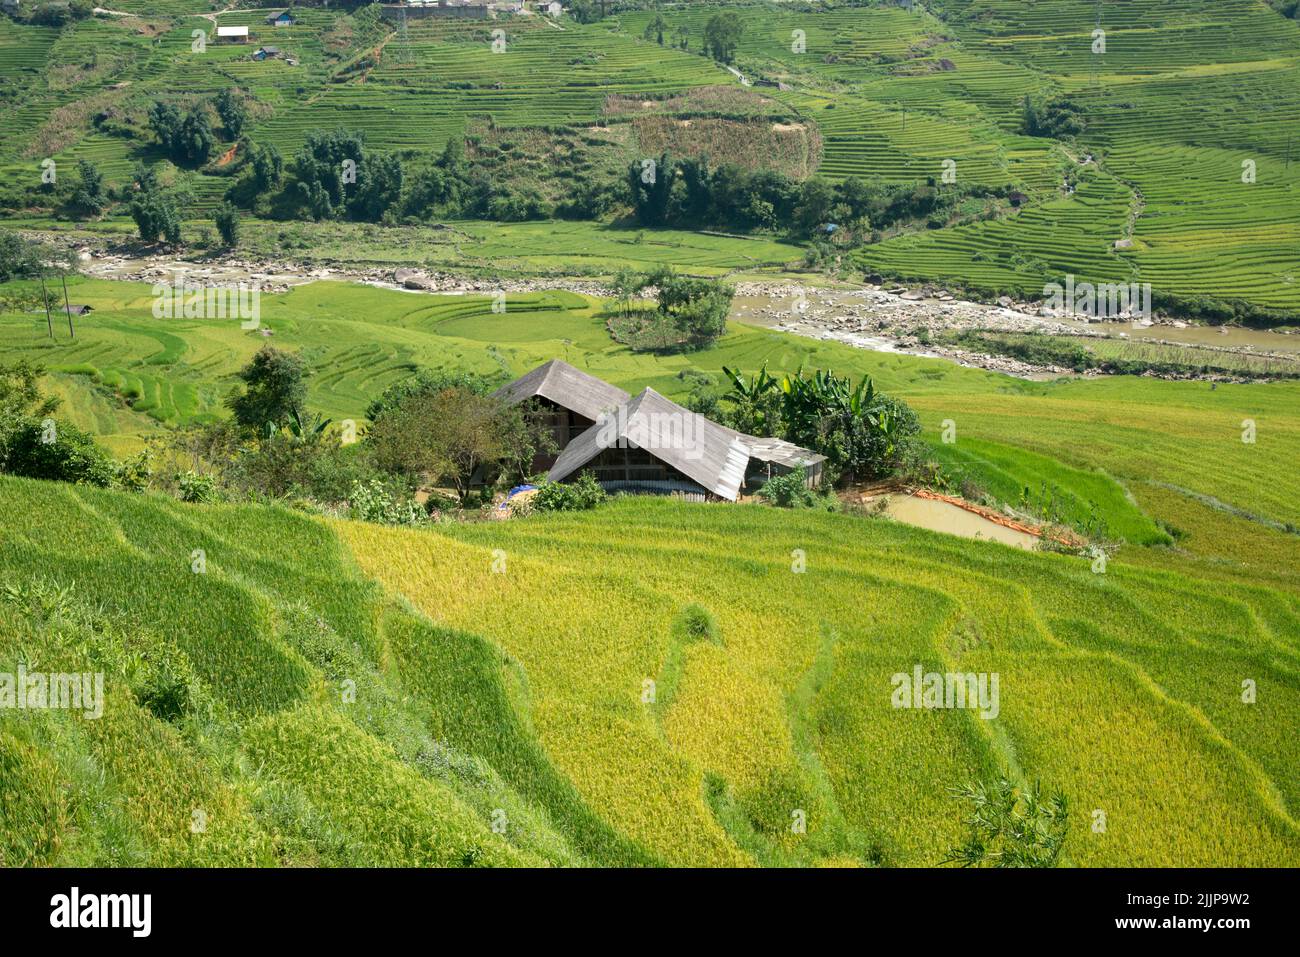 A small house in the middle of a rice field in Sa Pa, Vietnam Stock Photo